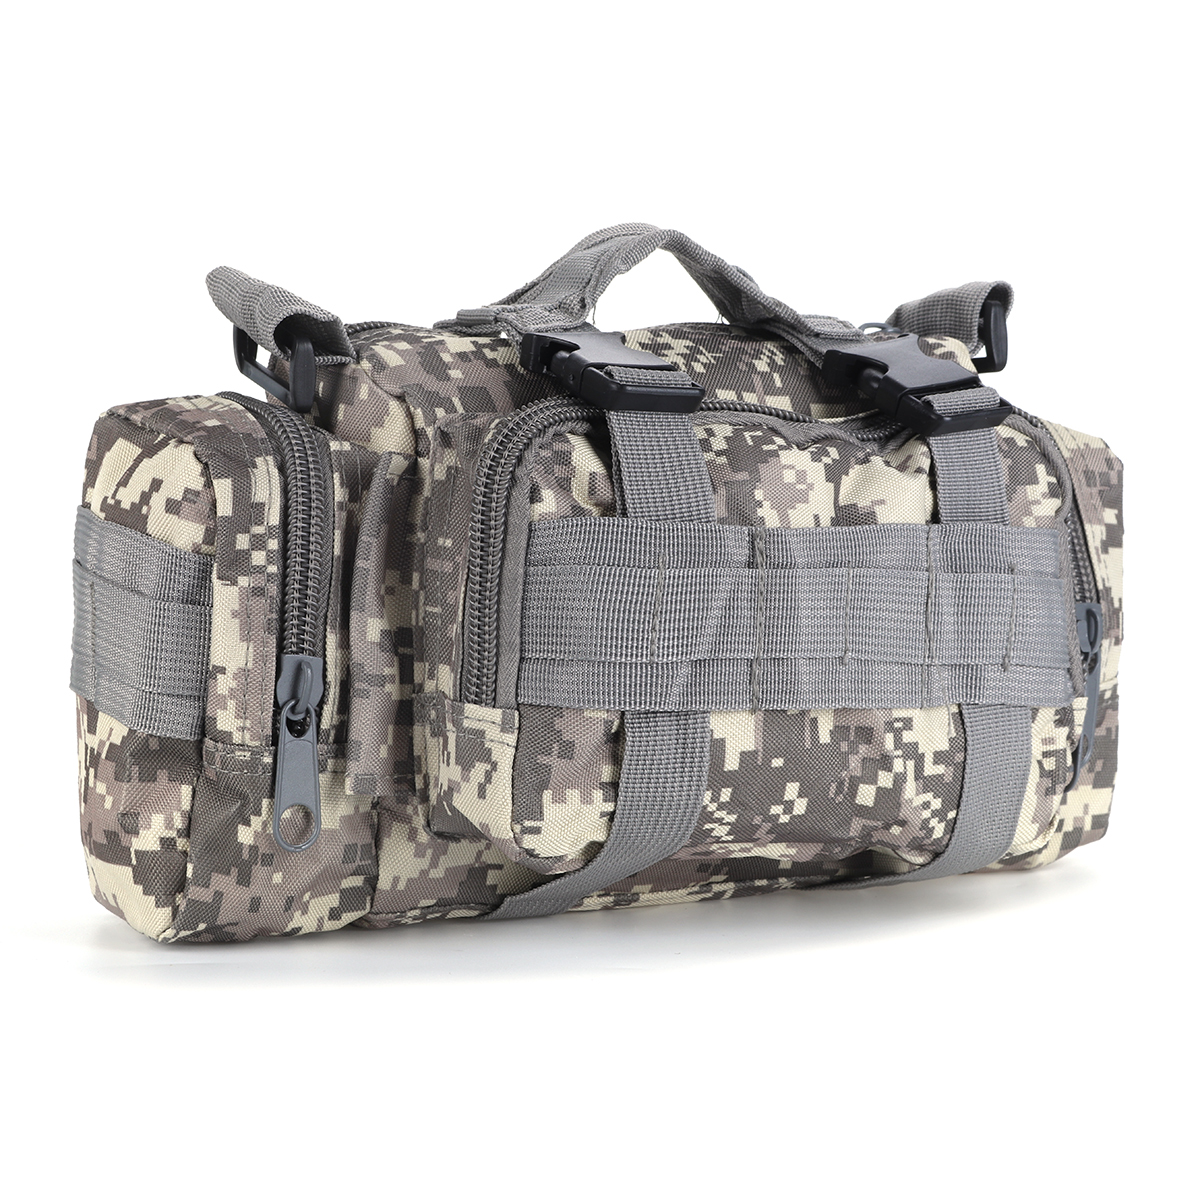 Multifunctional-Outdoor-Sports-Hiking-with-Zippers-Nylon-Oxford-Cloth-Tactical-Shoulder-Bag-Waist-Pa-1825563-11